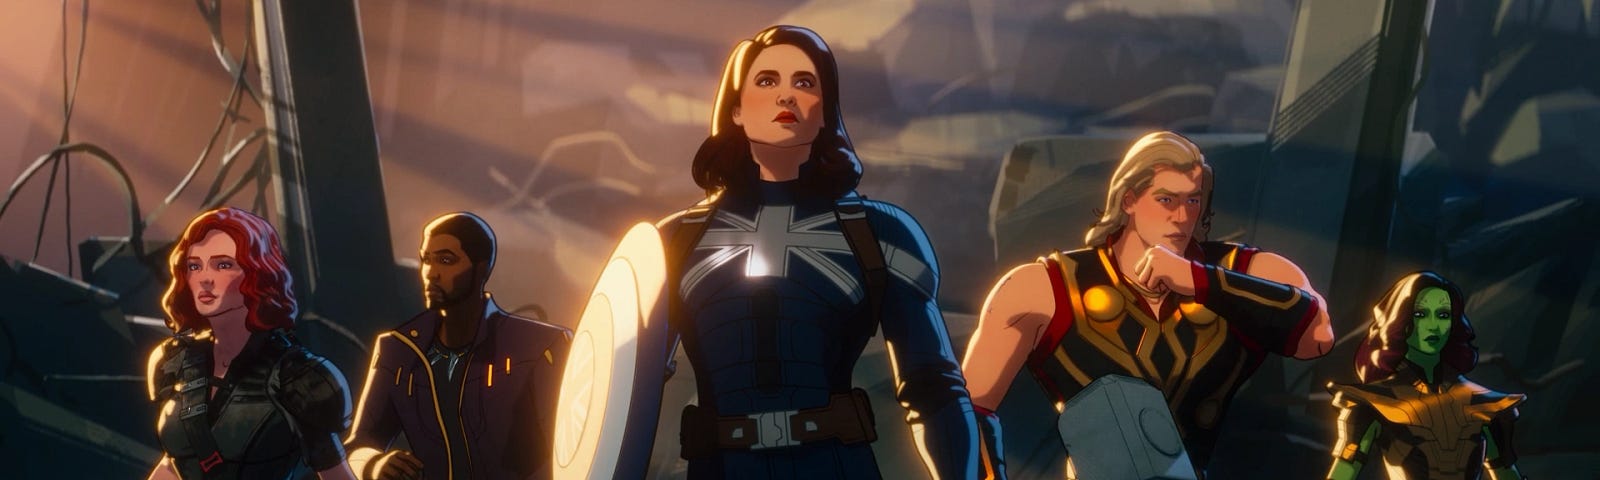 A still from Marvel’s What-If. Guardians of the Multiverse, Captain Carter in a Union Jack version of Captain America’s uniform, a beardless variant of Thor, a variant of T’Challa who became Starlord, a post-apocalypse variant of Black Widow, and a variant of Gamorra with armor reminiscent of Thanos’.